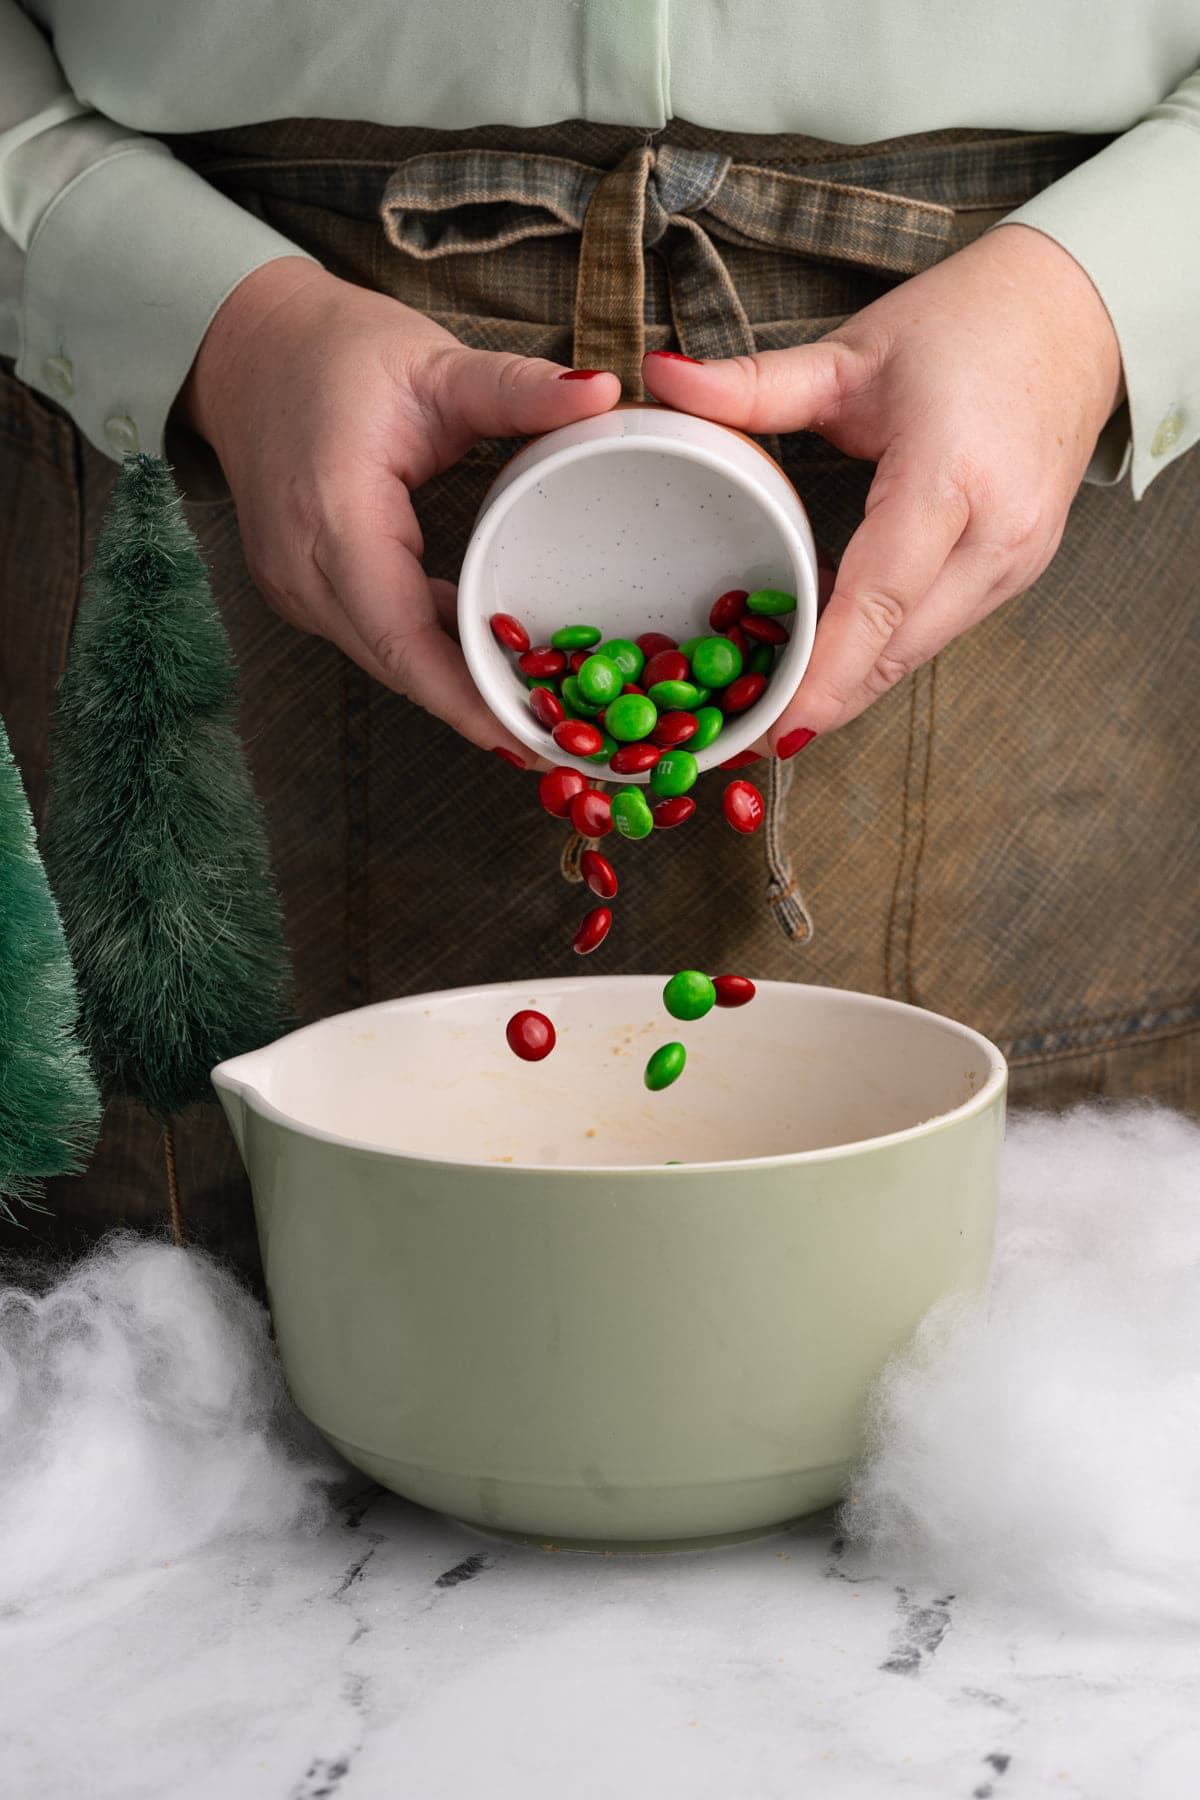 Adding just green and red M&M's to cookie dough to make them festive for Christmas.